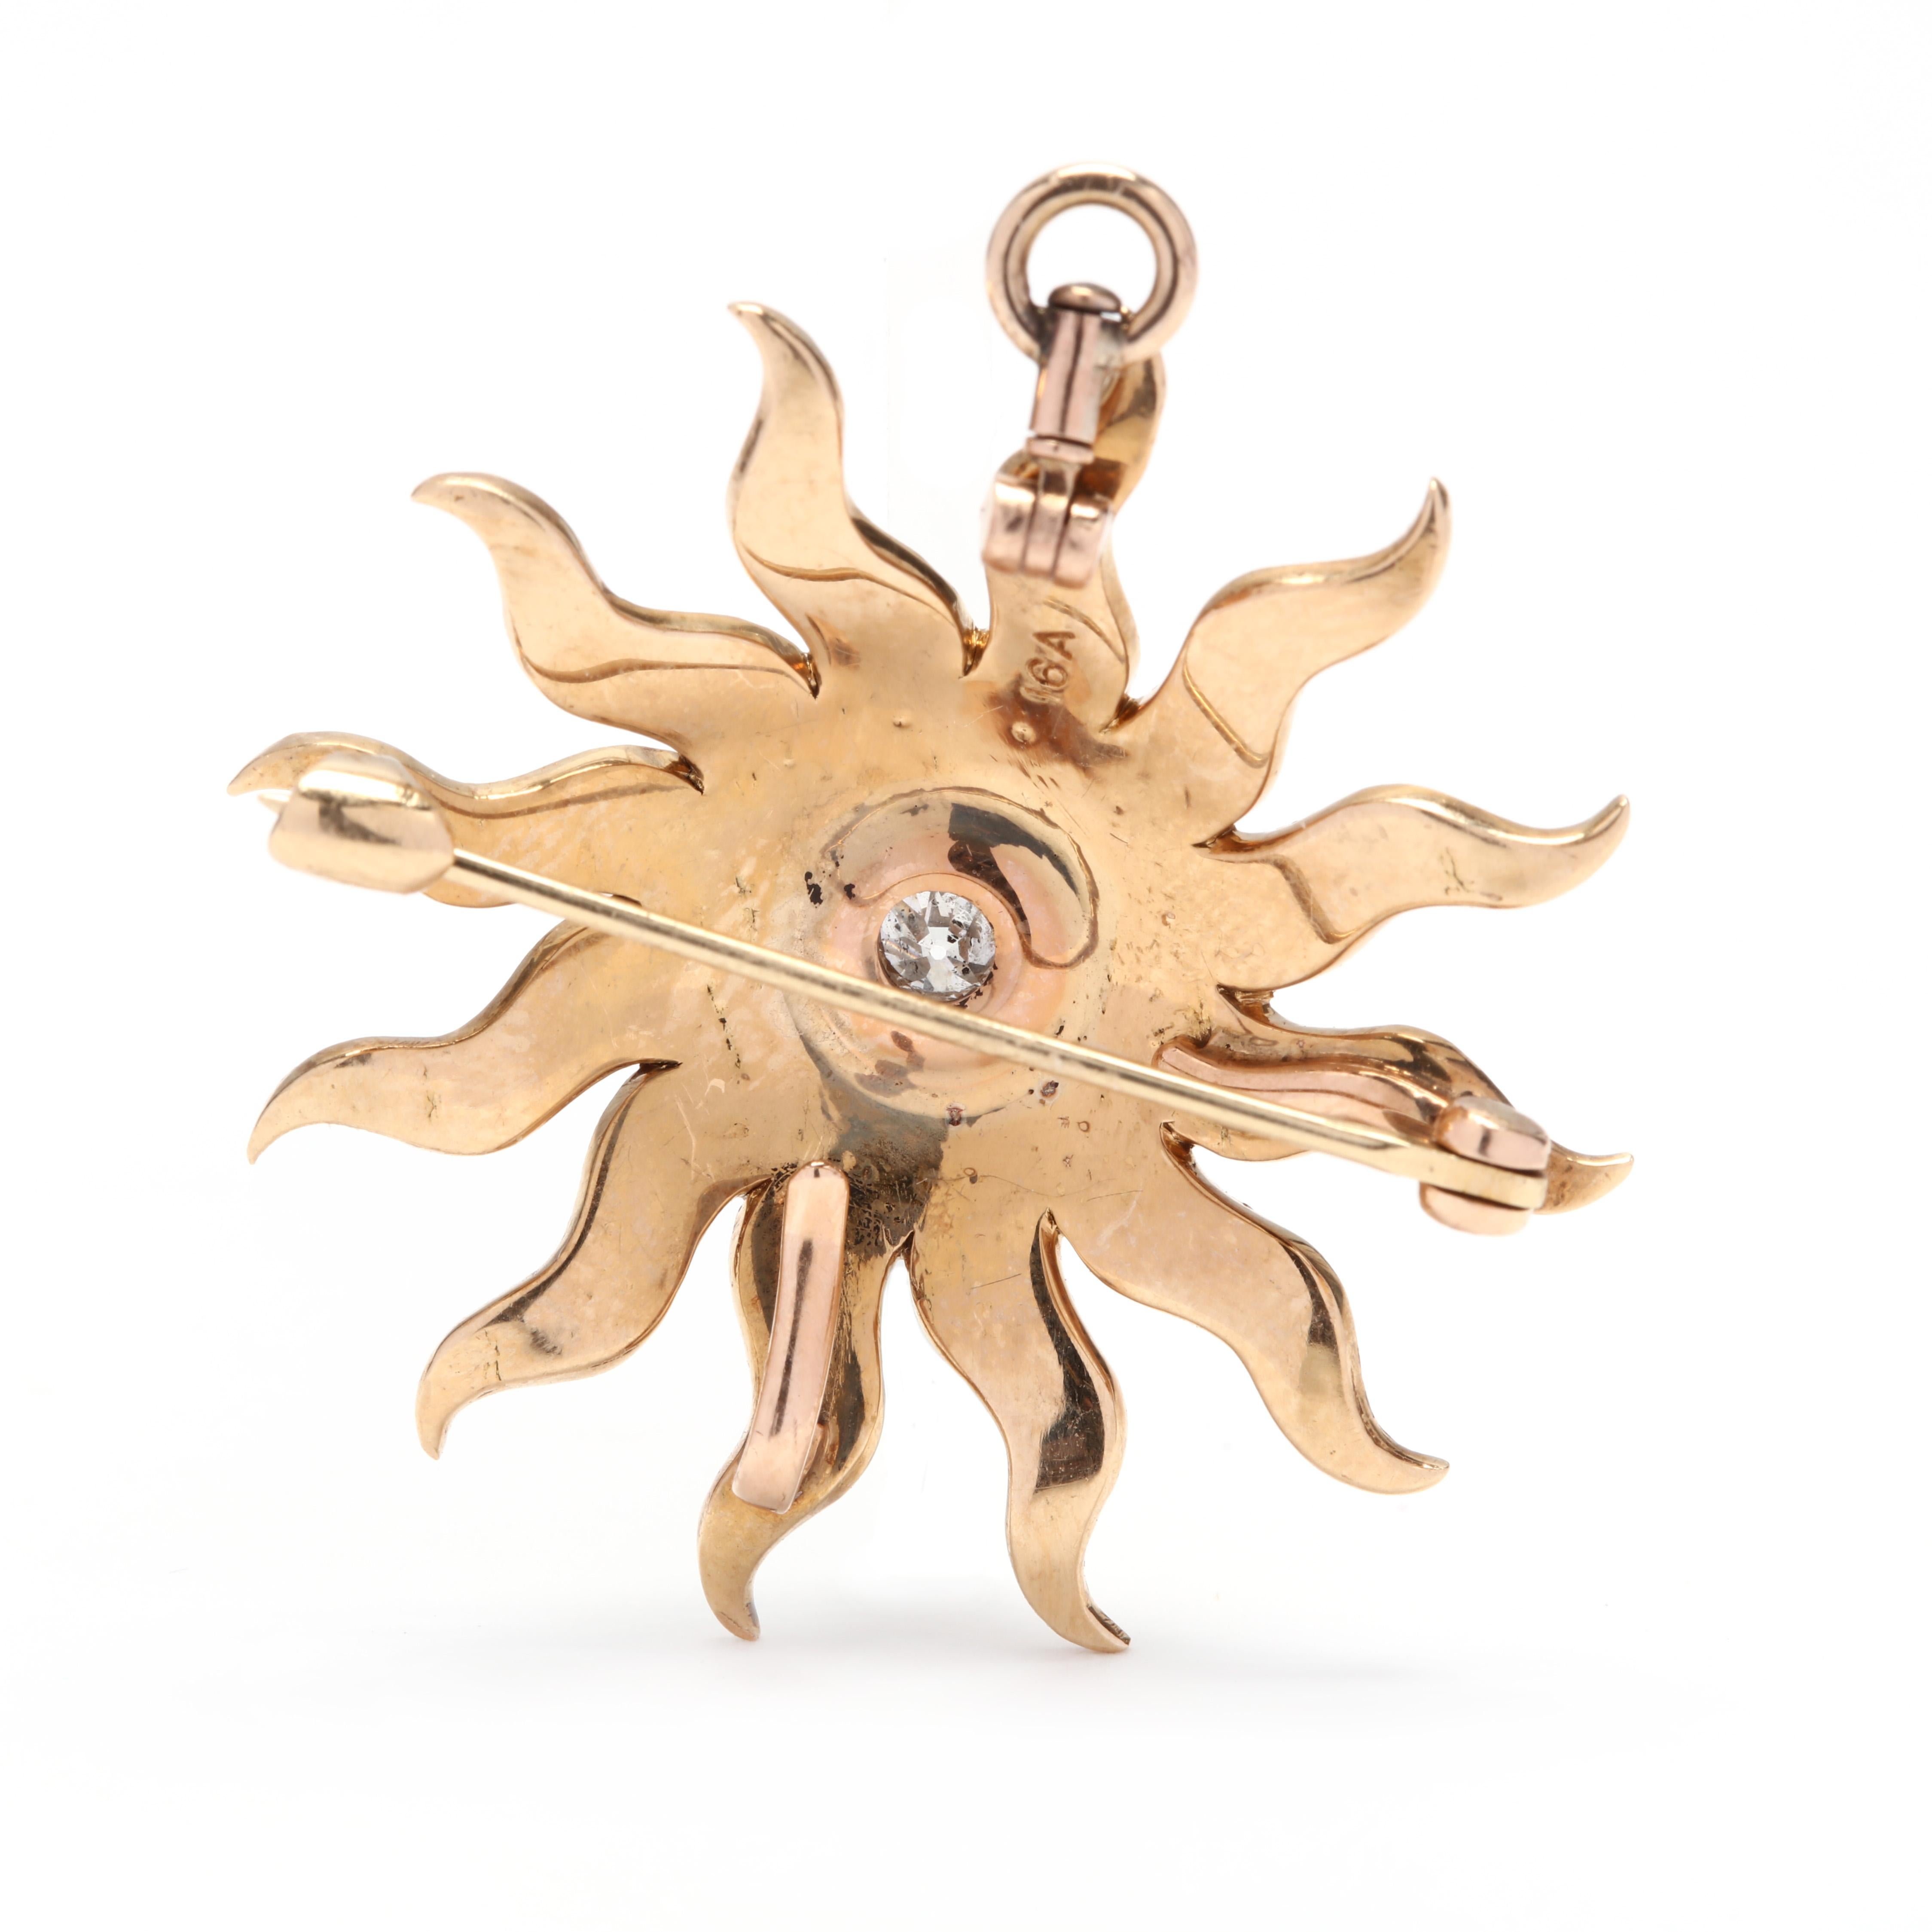 An antique 14 karat yellow gold diamond and seed pearl sunburst pendant and brooch. This pendant features an old European cut diamond centerstone weighing approximately .17 carat surrounded by round cbaochon seed pearls set in a sunburst motif with